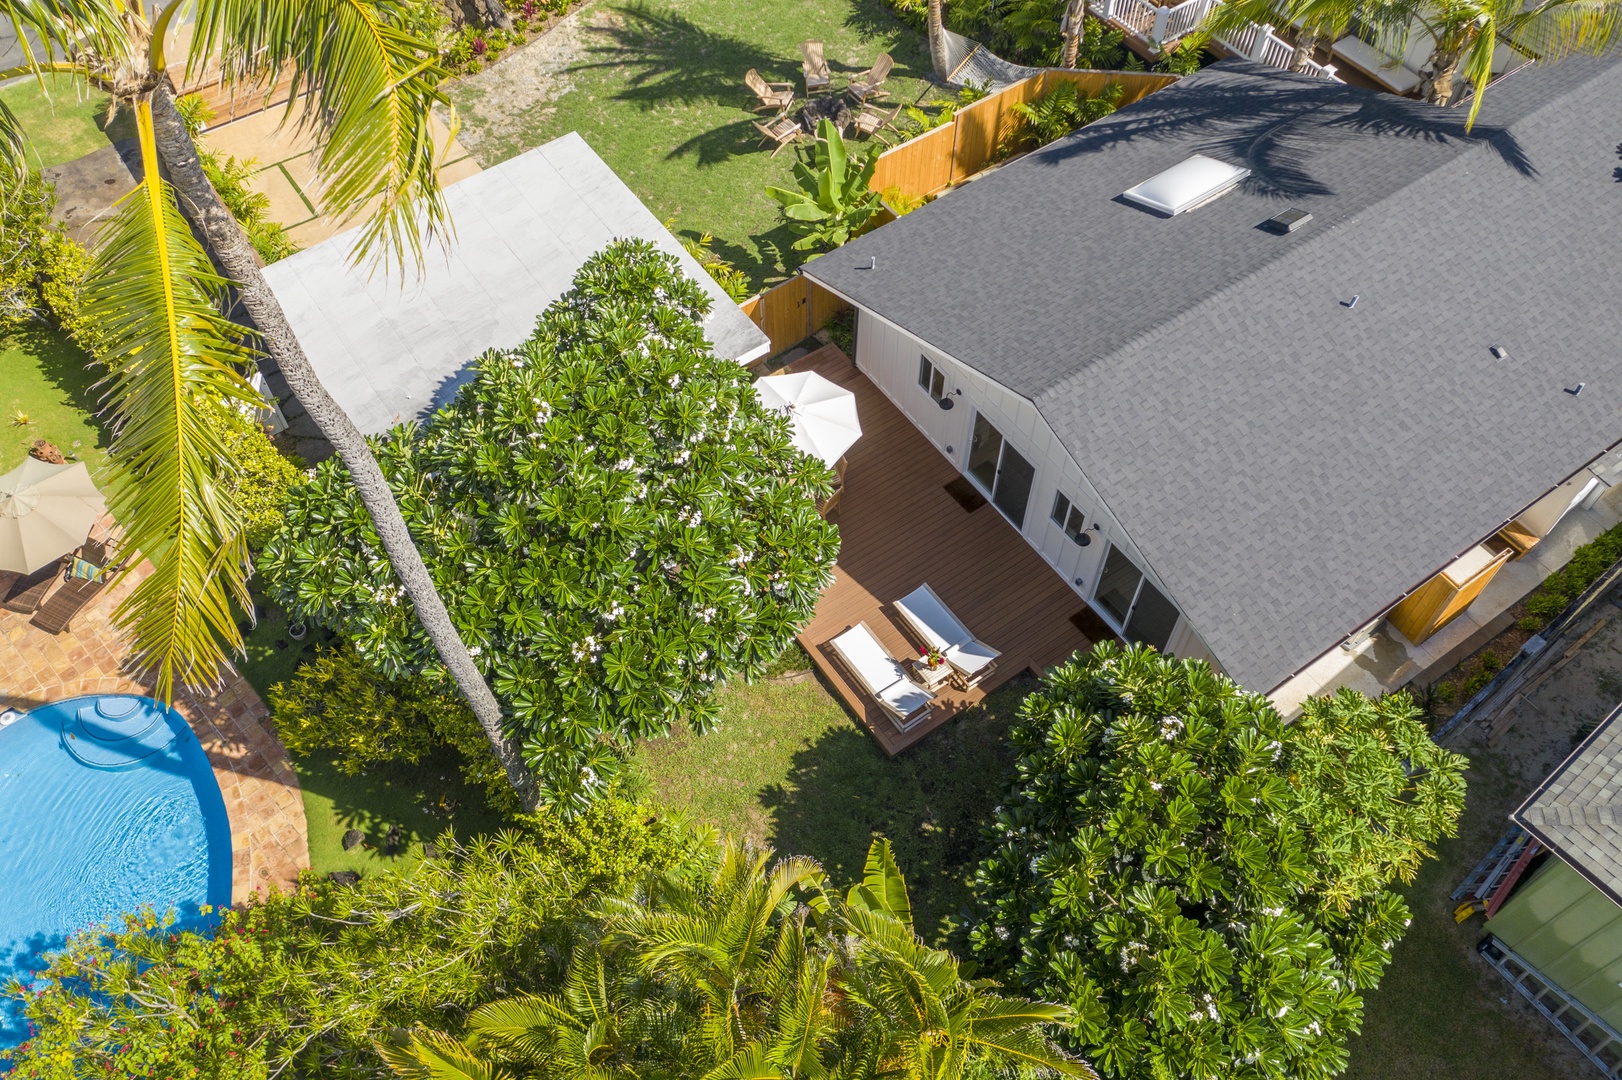 Kailua Vacation Rentals, Ranch Beach House - Just imagine basking in the island sun and feeling the gentle, ocean breeze